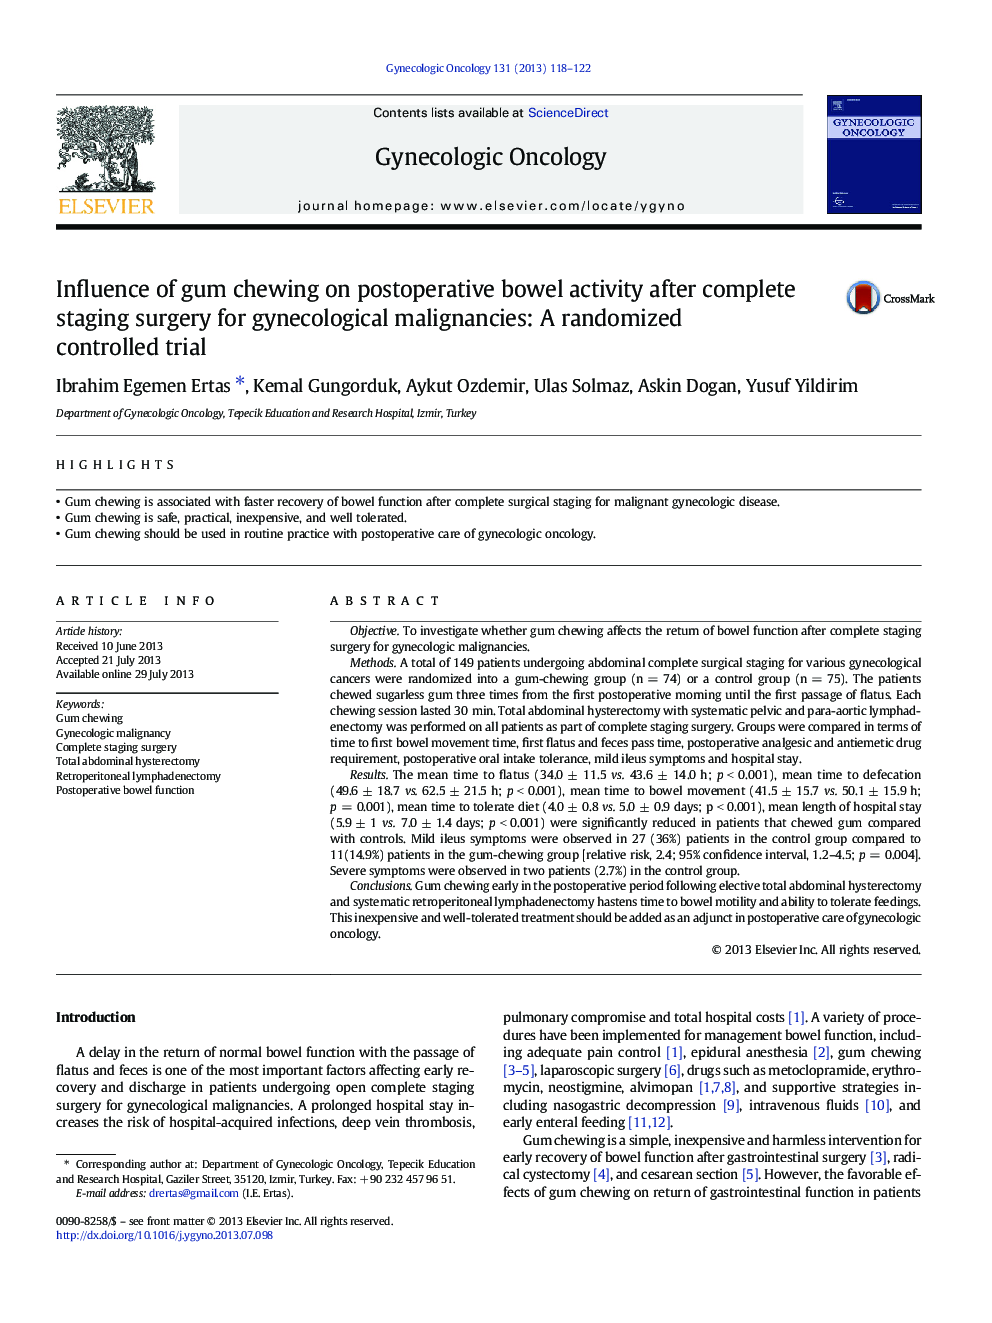 Influence of gum chewing on postoperative bowel activity after complete staging surgery for gynecological malignancies: A randomized controlled trial